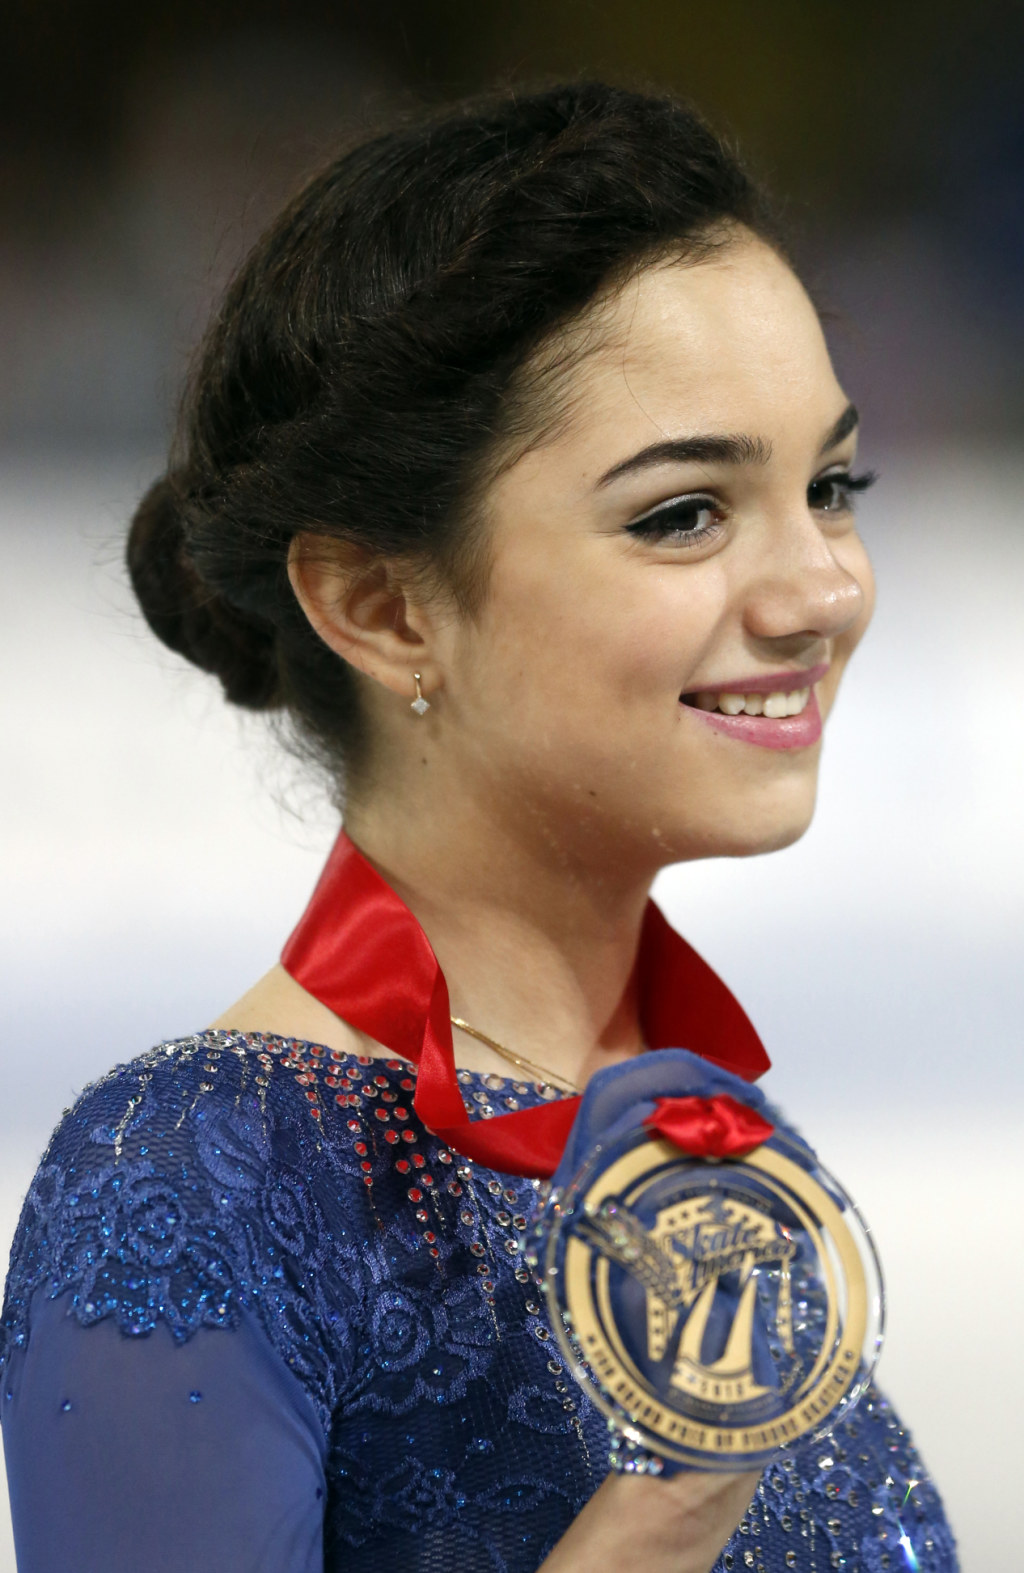 Evgenia Medvedeva, of Russia, displays her medal after competing фото (photo)